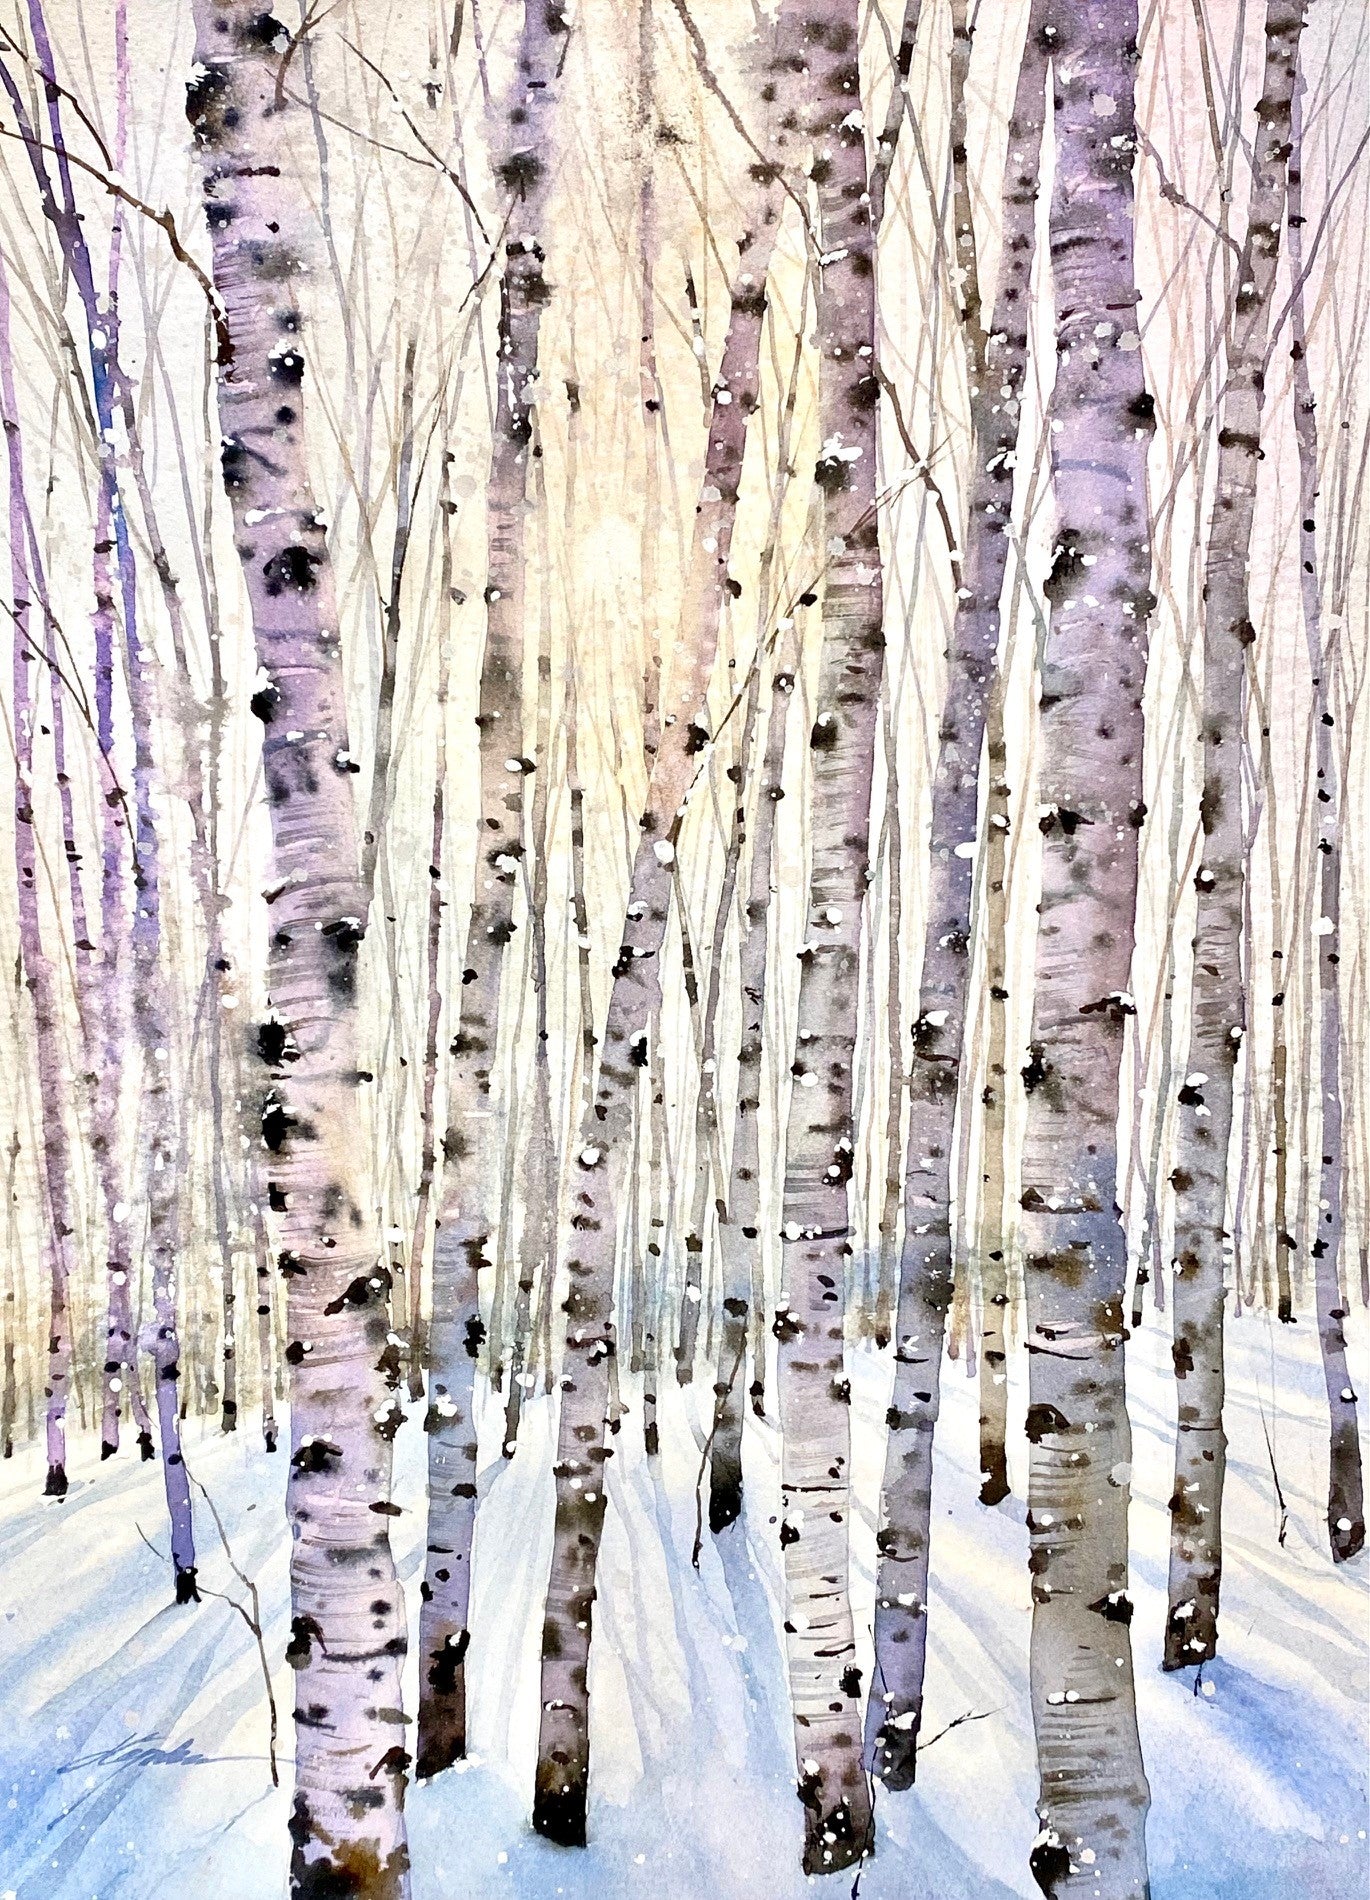 "Winter Song" Watercolor Painting on Paper 14"x11" Framed, Hand Painted